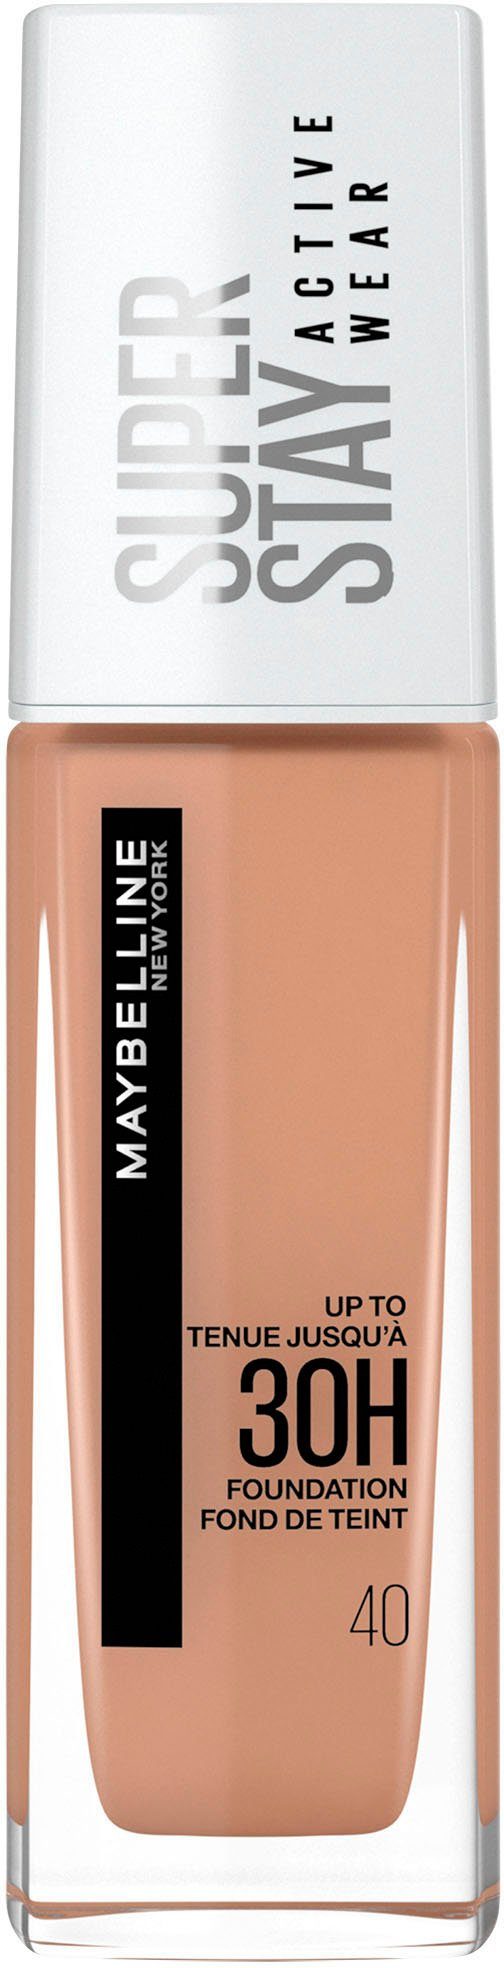 Super NEW 40 Stay Wear YORK Fawn Foundation MAYBELLINE Active